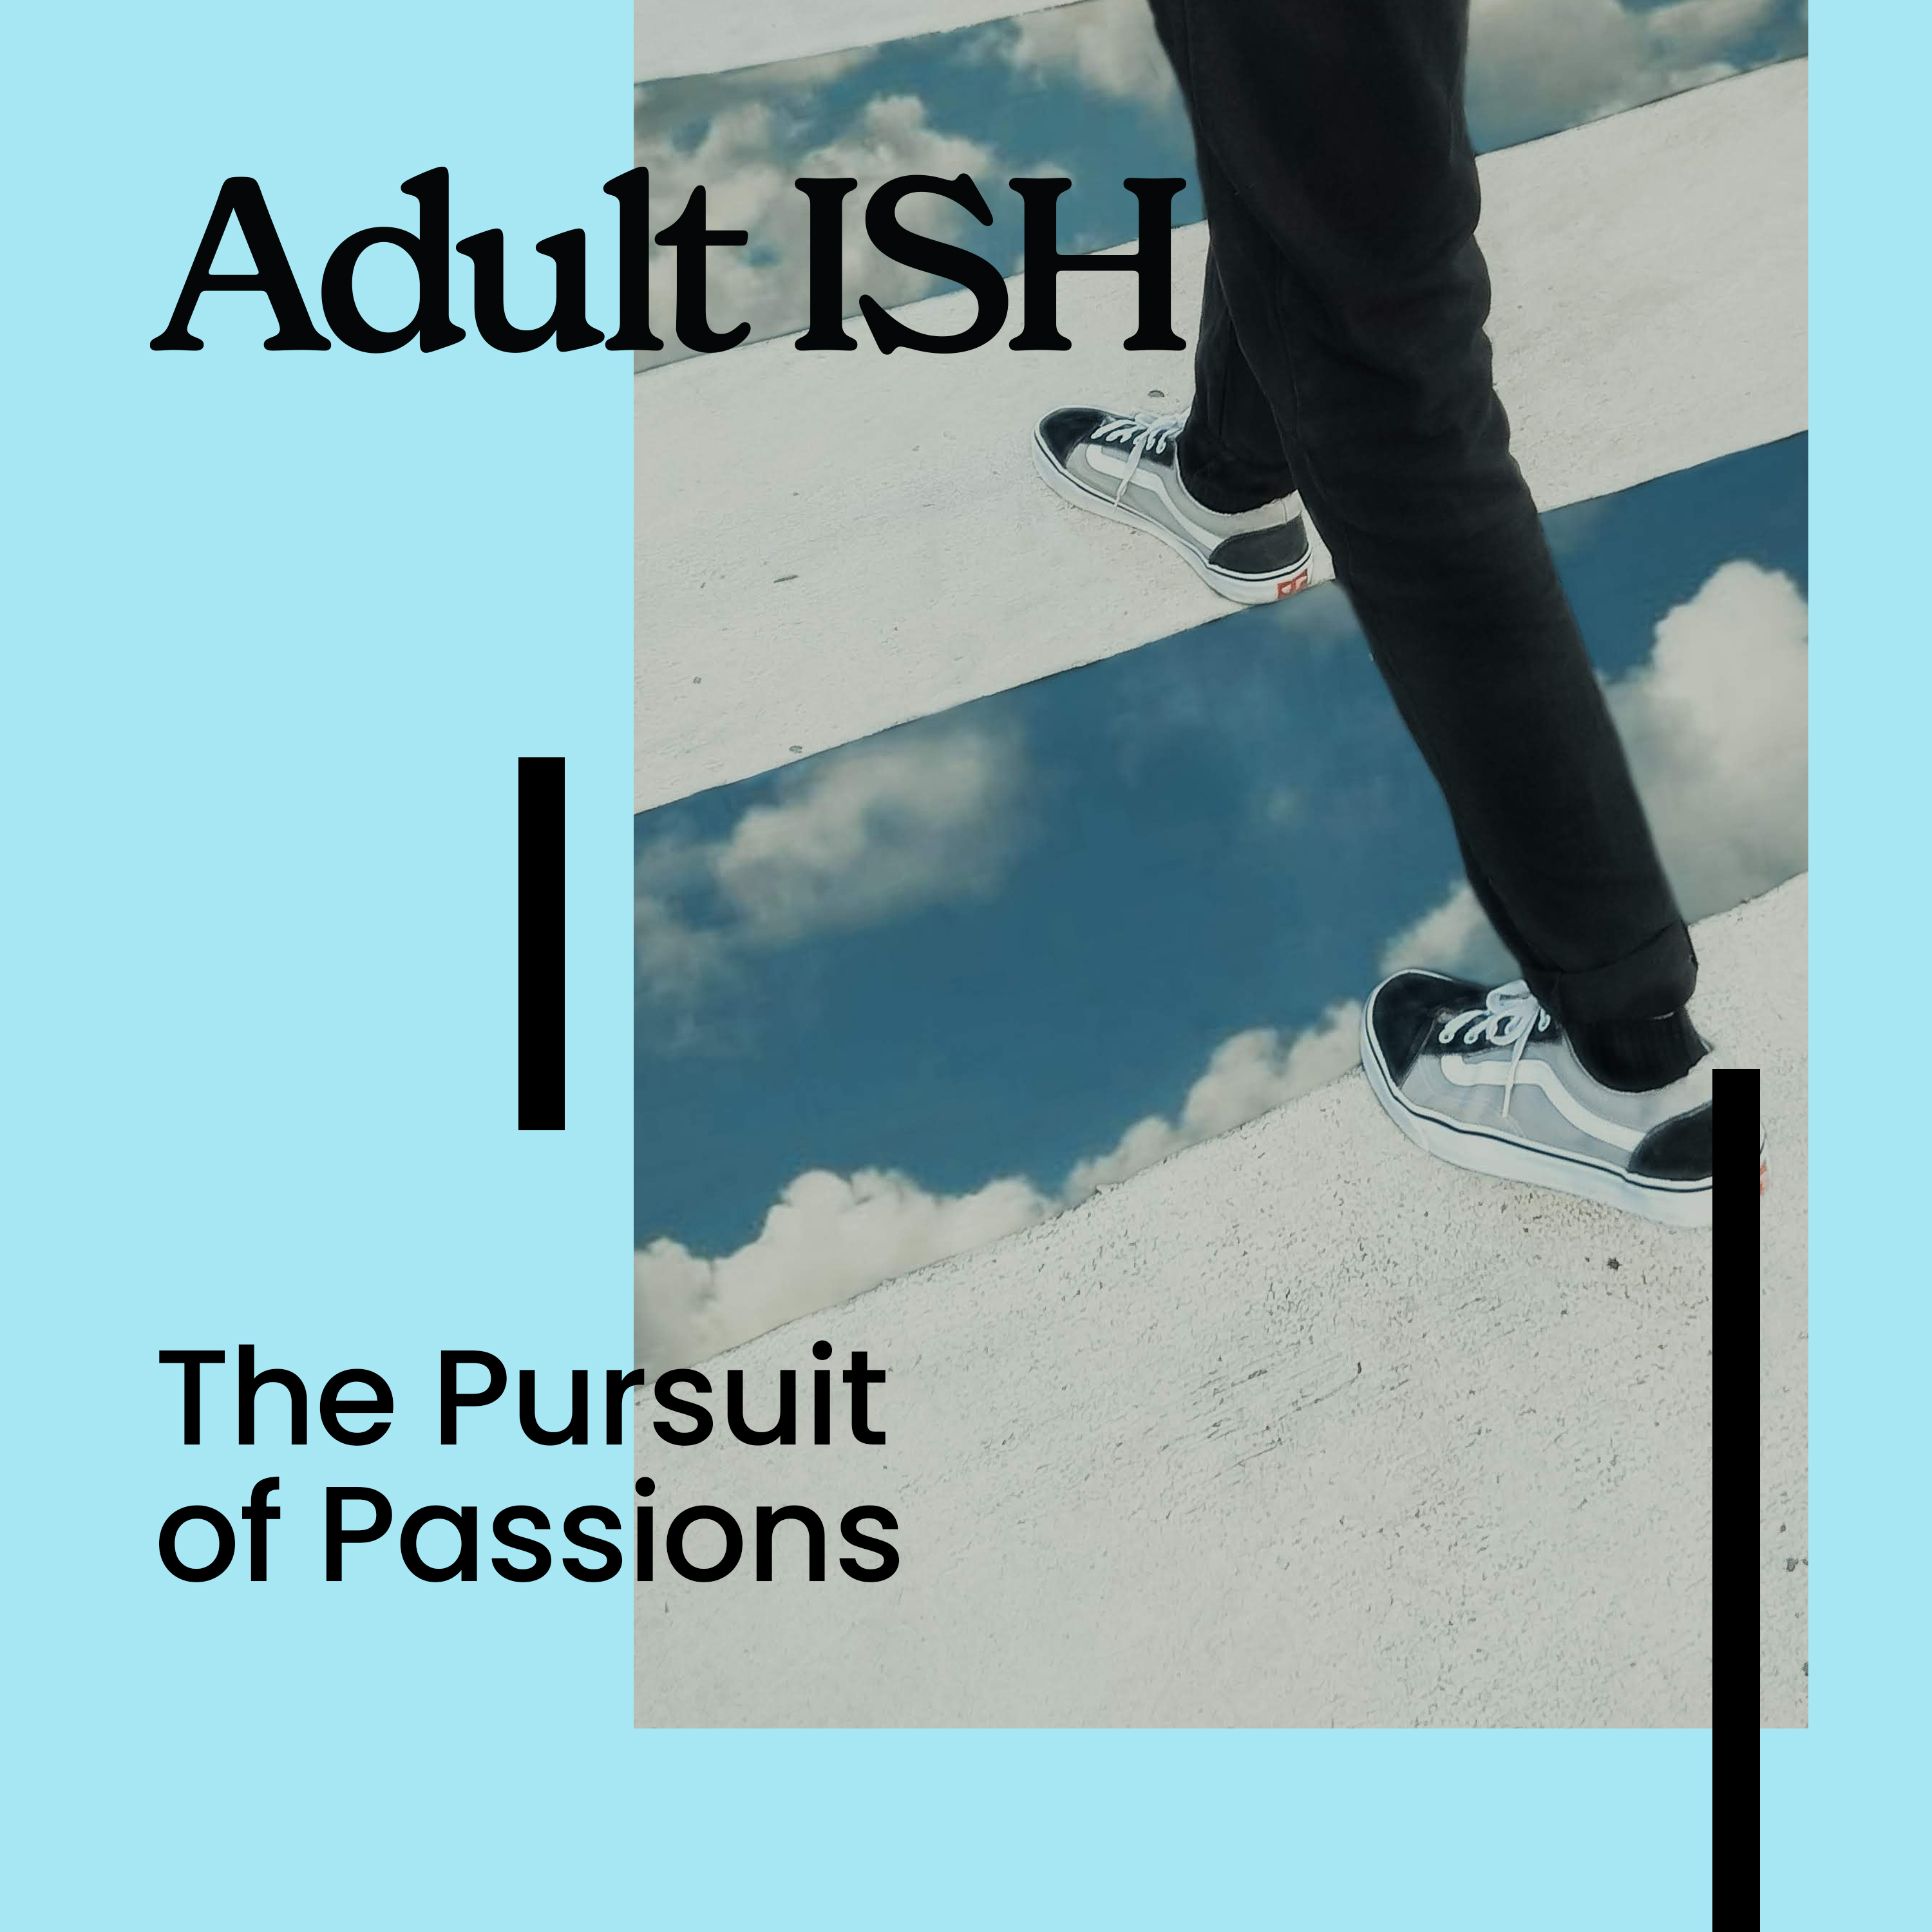 The Pursuit of Passions